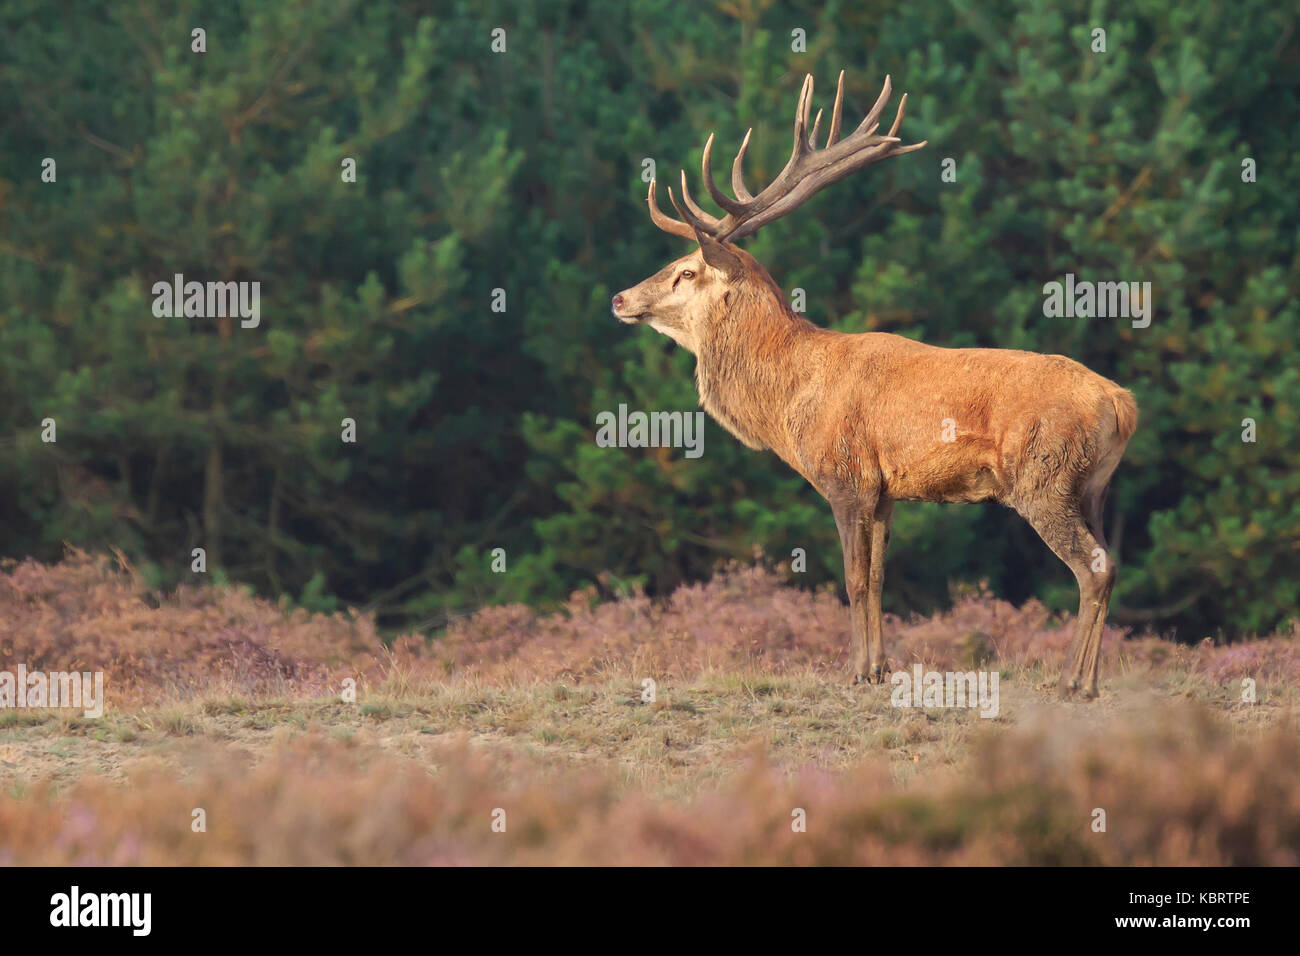 Red deer Cervus elaphus stag with big antlers during rutting season in heathland with a dark forest on the background. Stock Photo